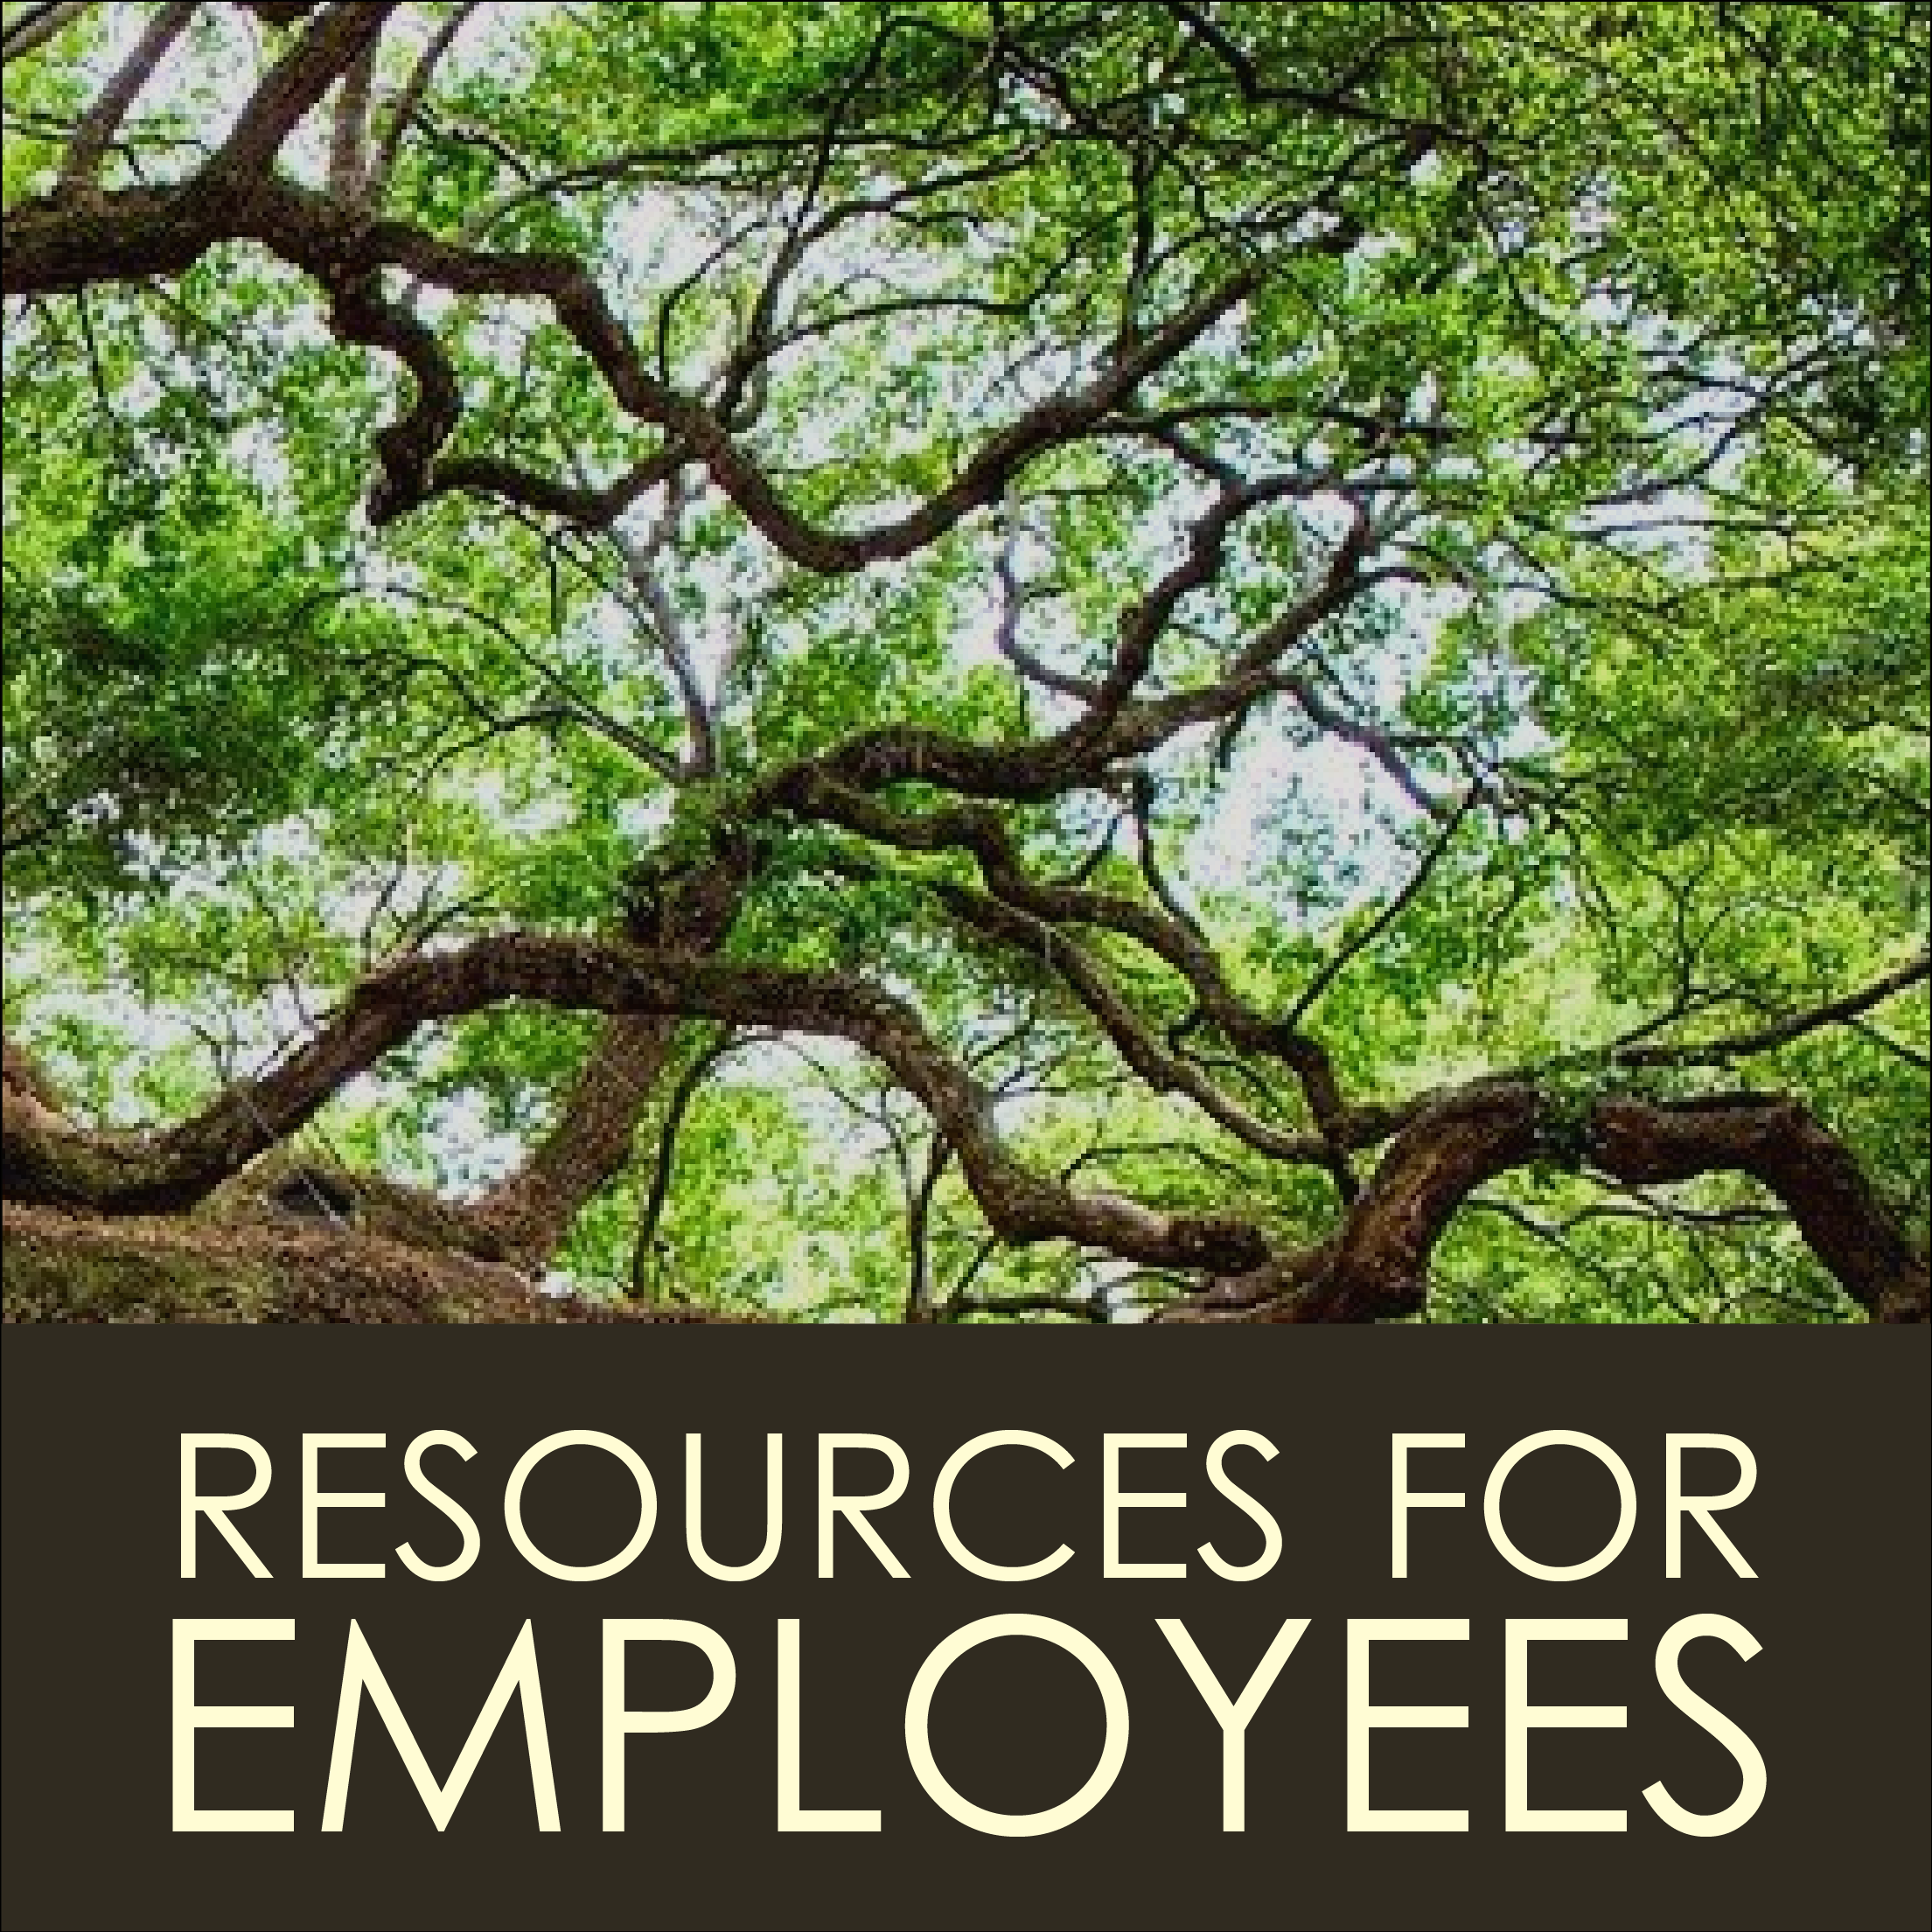 employee-resources---ecosystem-of-care-02.png